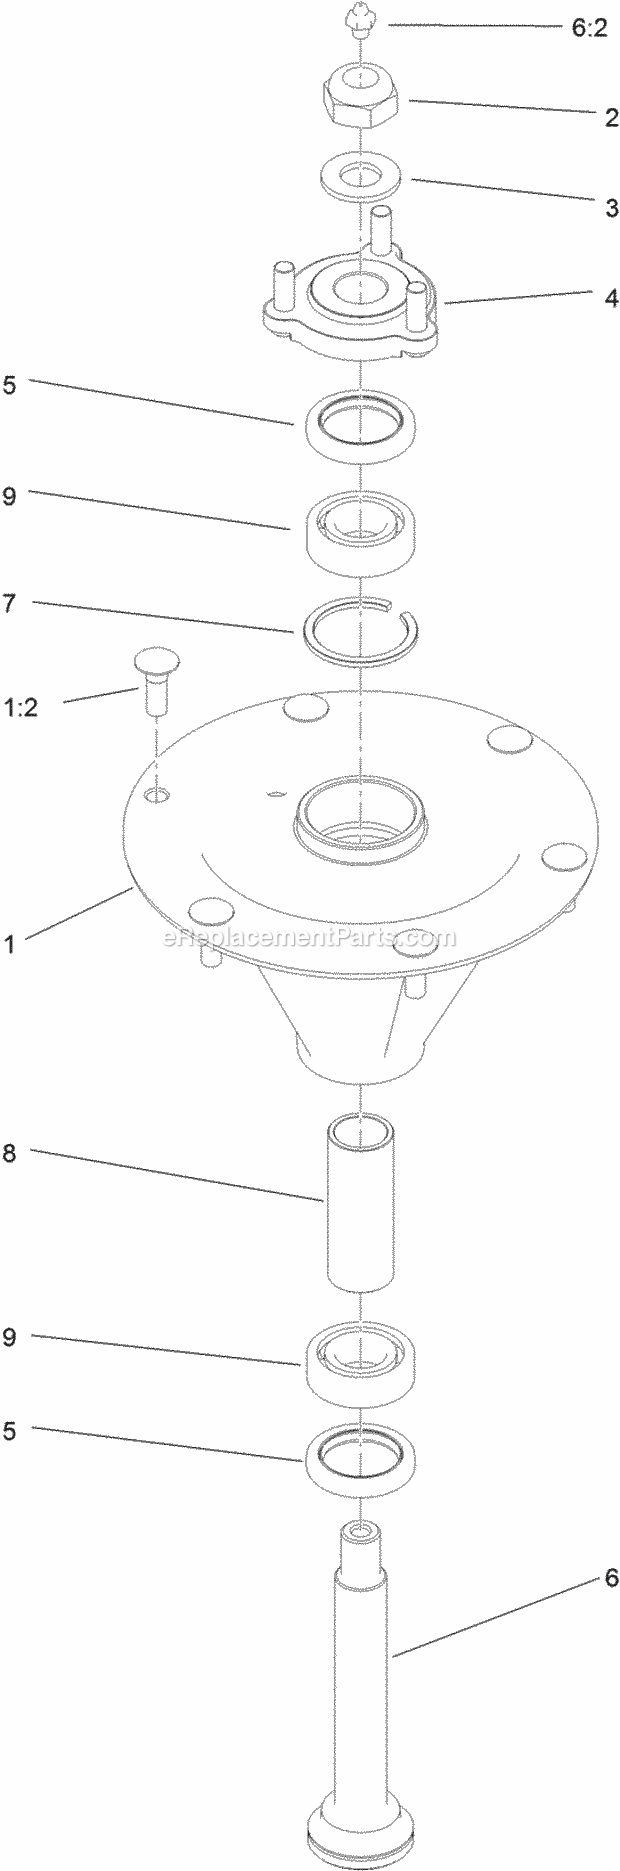 Toro 74589 (314000001-314999999) Grandstand Mower, With 52in Turbo Force Cutting Unit, 2014 Spindle Assembly No. 119-8560 Diagram